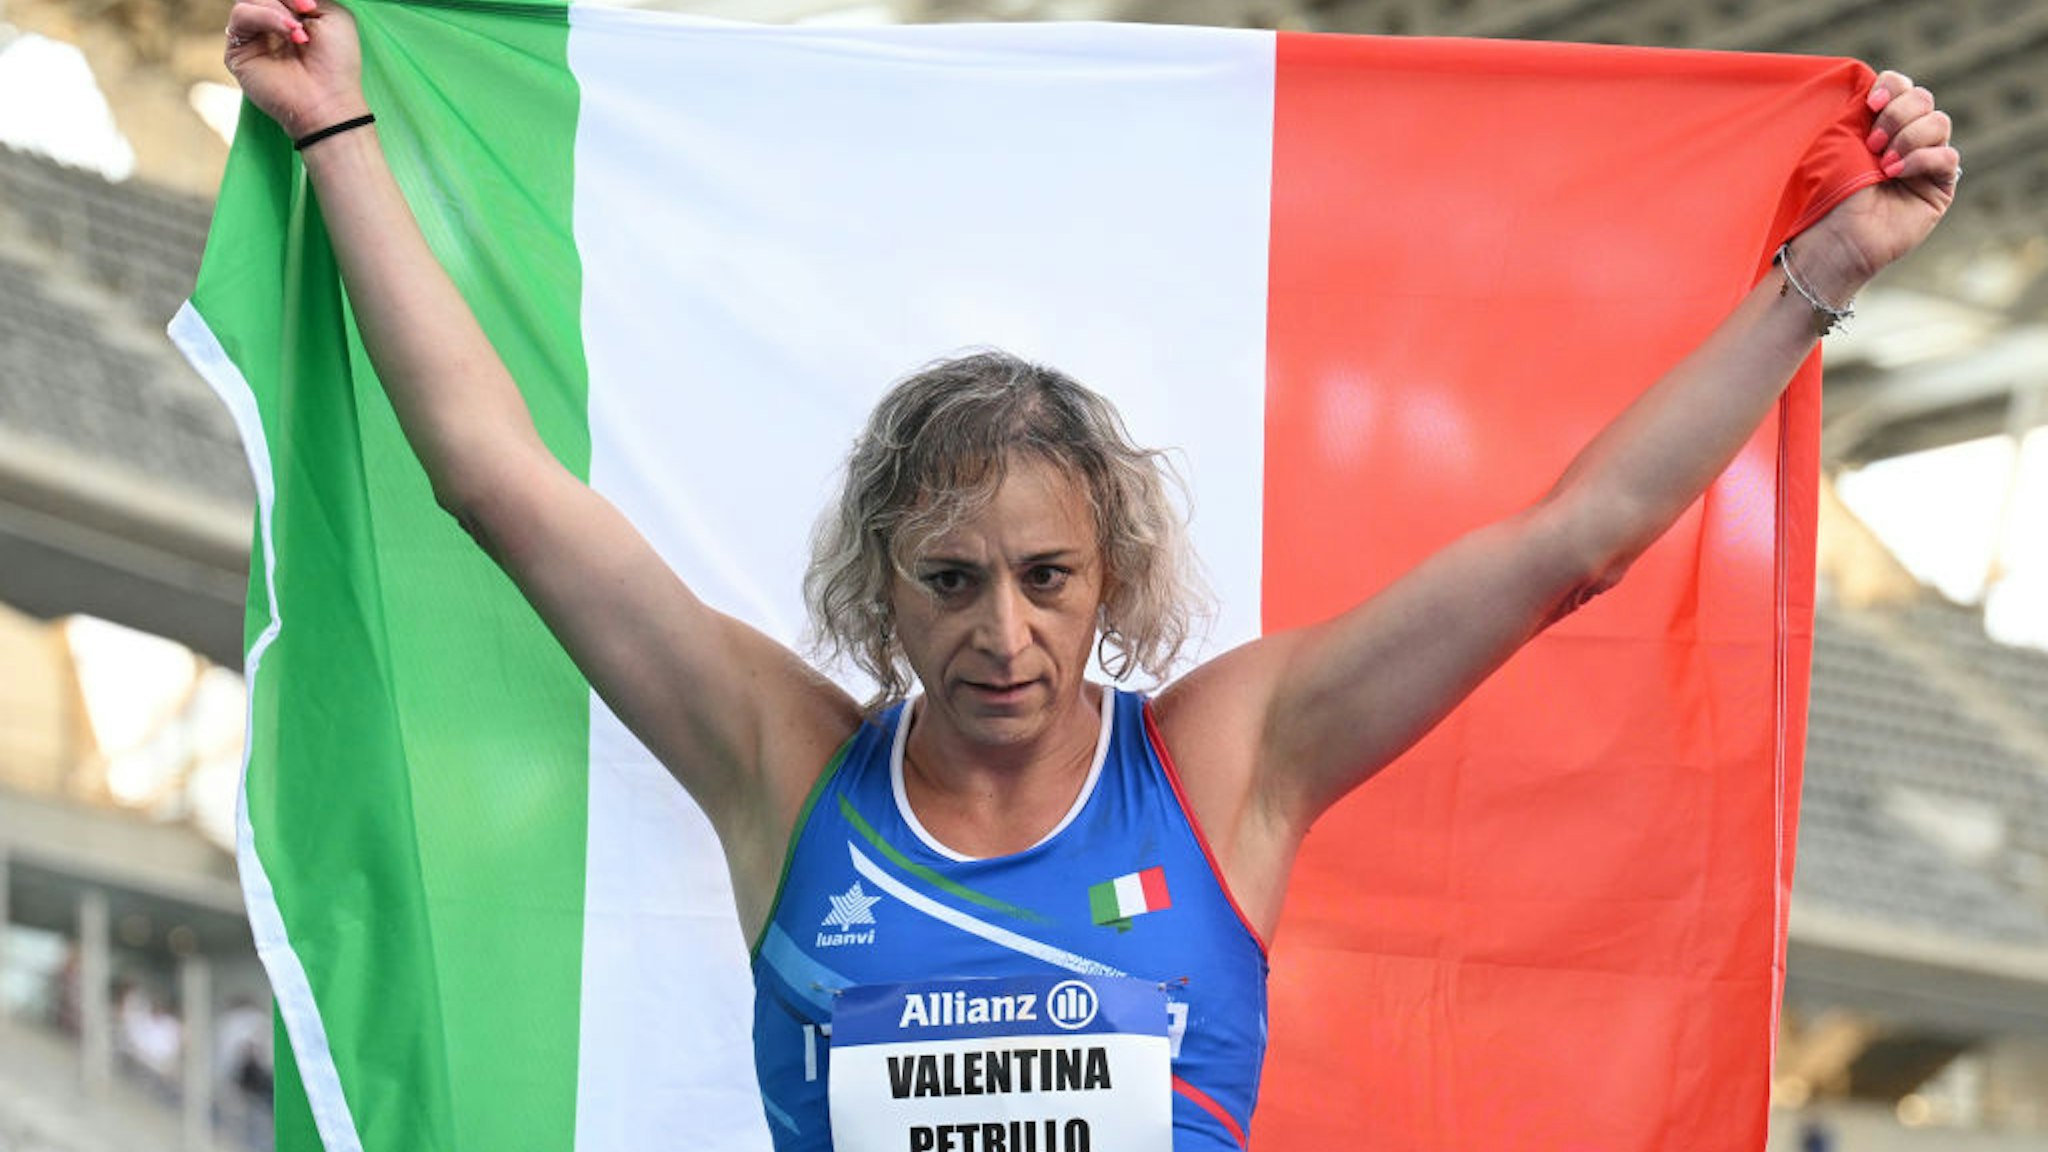 PARIS, FRANCE - JULY 13: Valentina Petrillo of Italy celebrates after the Women's 400m T12 Final during day six of the Para Athletics World Championships Paris 2023 at Stade Charlety on July 13, 2023 in Paris, France.